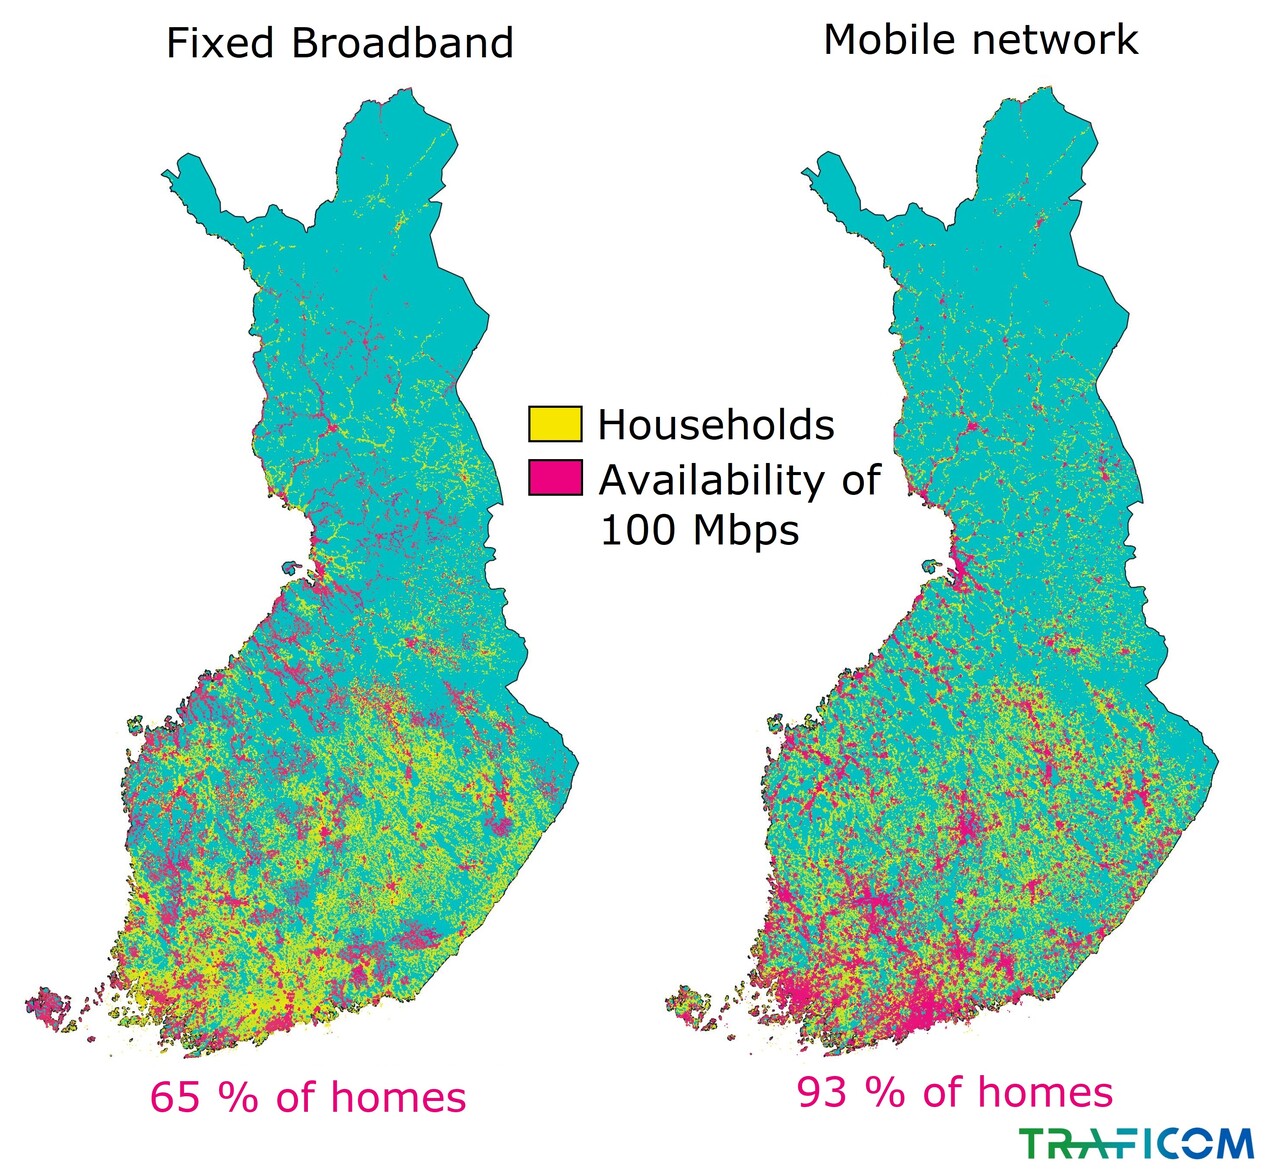 The map shows the availability of 100 Mbit/s fixed and mobile broadband connections in Finnish households at the end of 2020: Fixed broadband is available in 65% of households, while mobile broadband is available in 93% of them. 